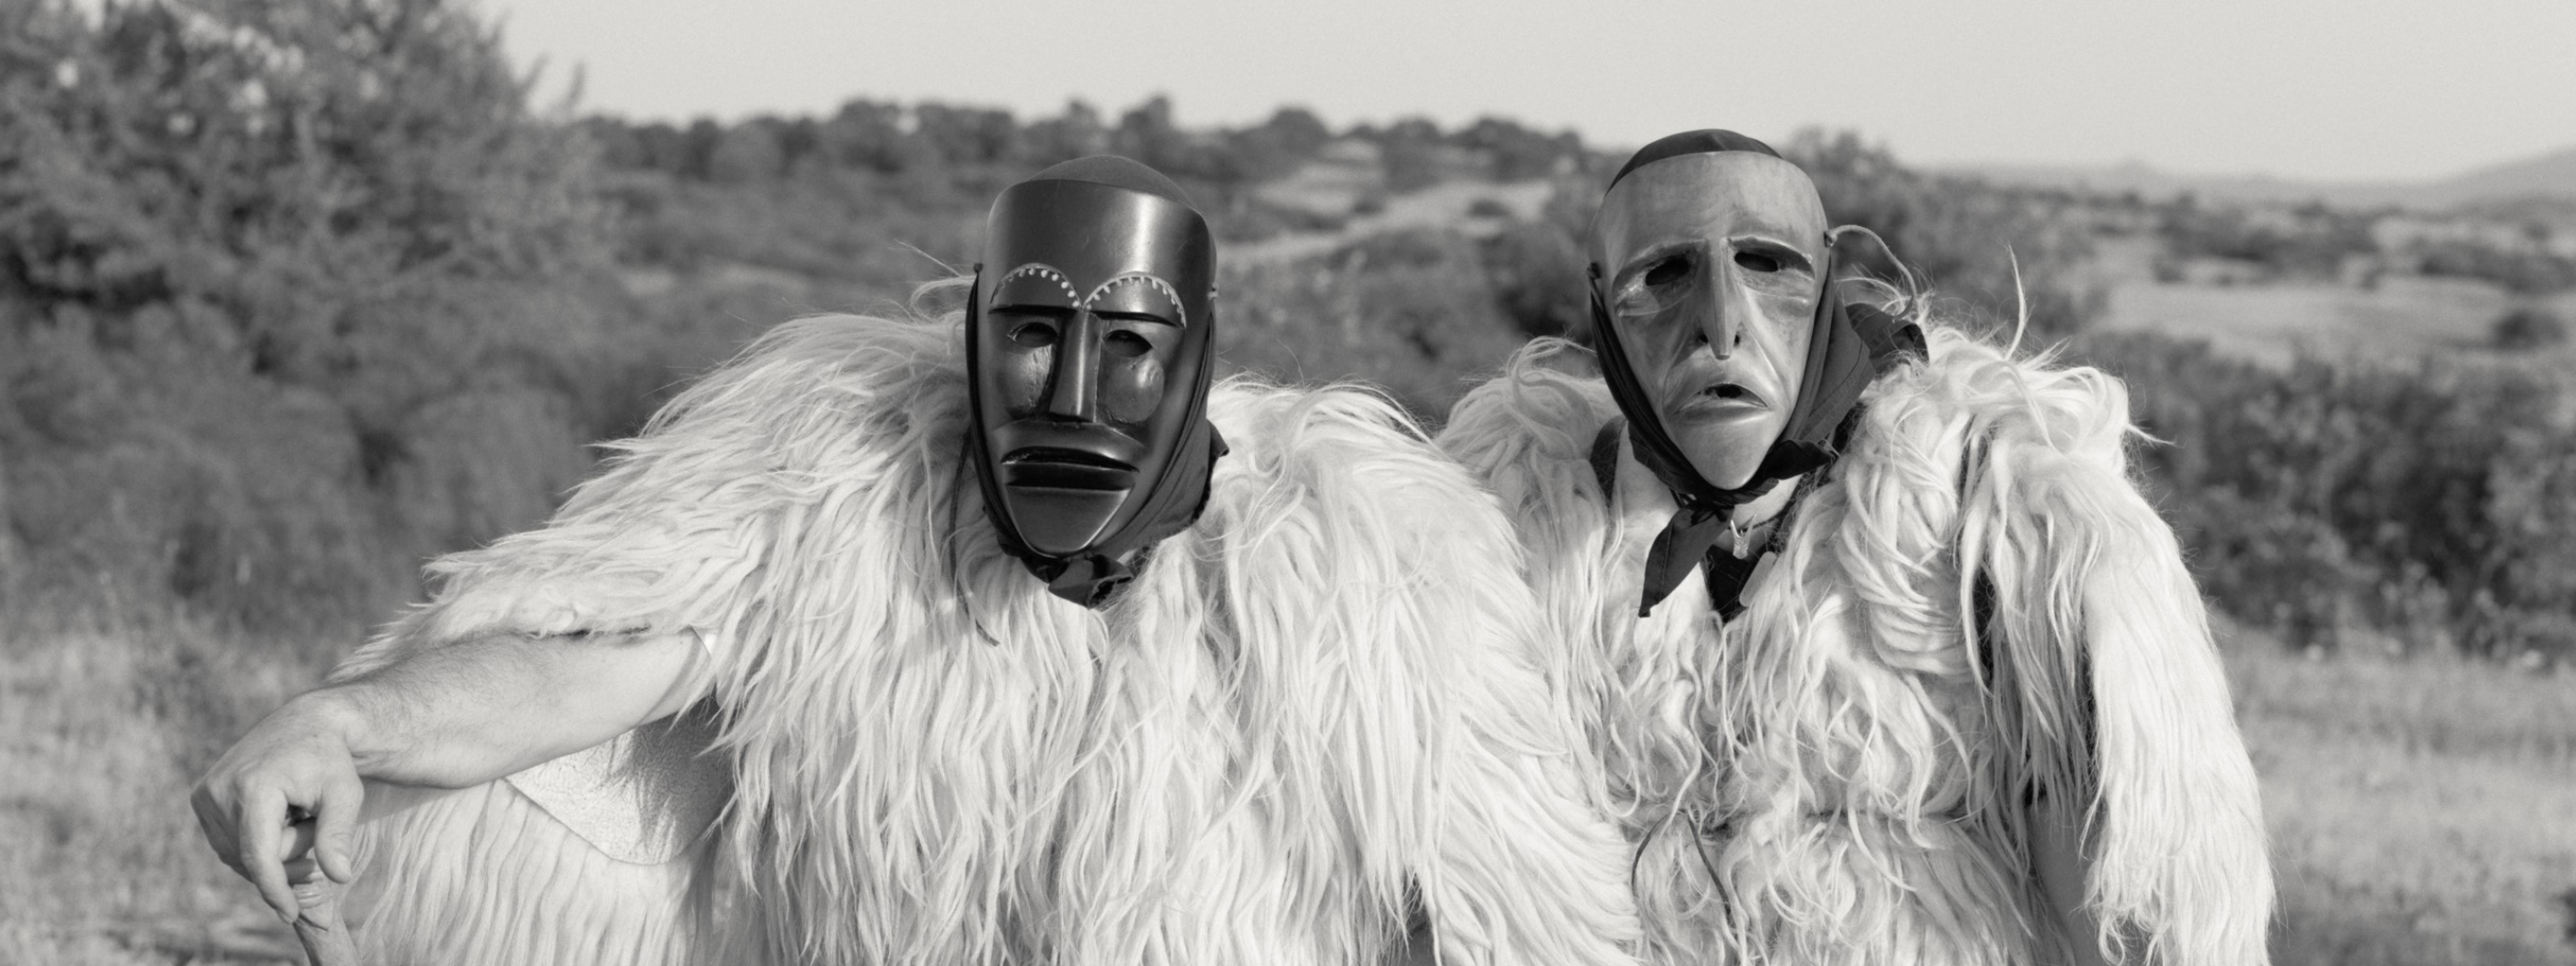 Two men in costume and with tribal masks on.